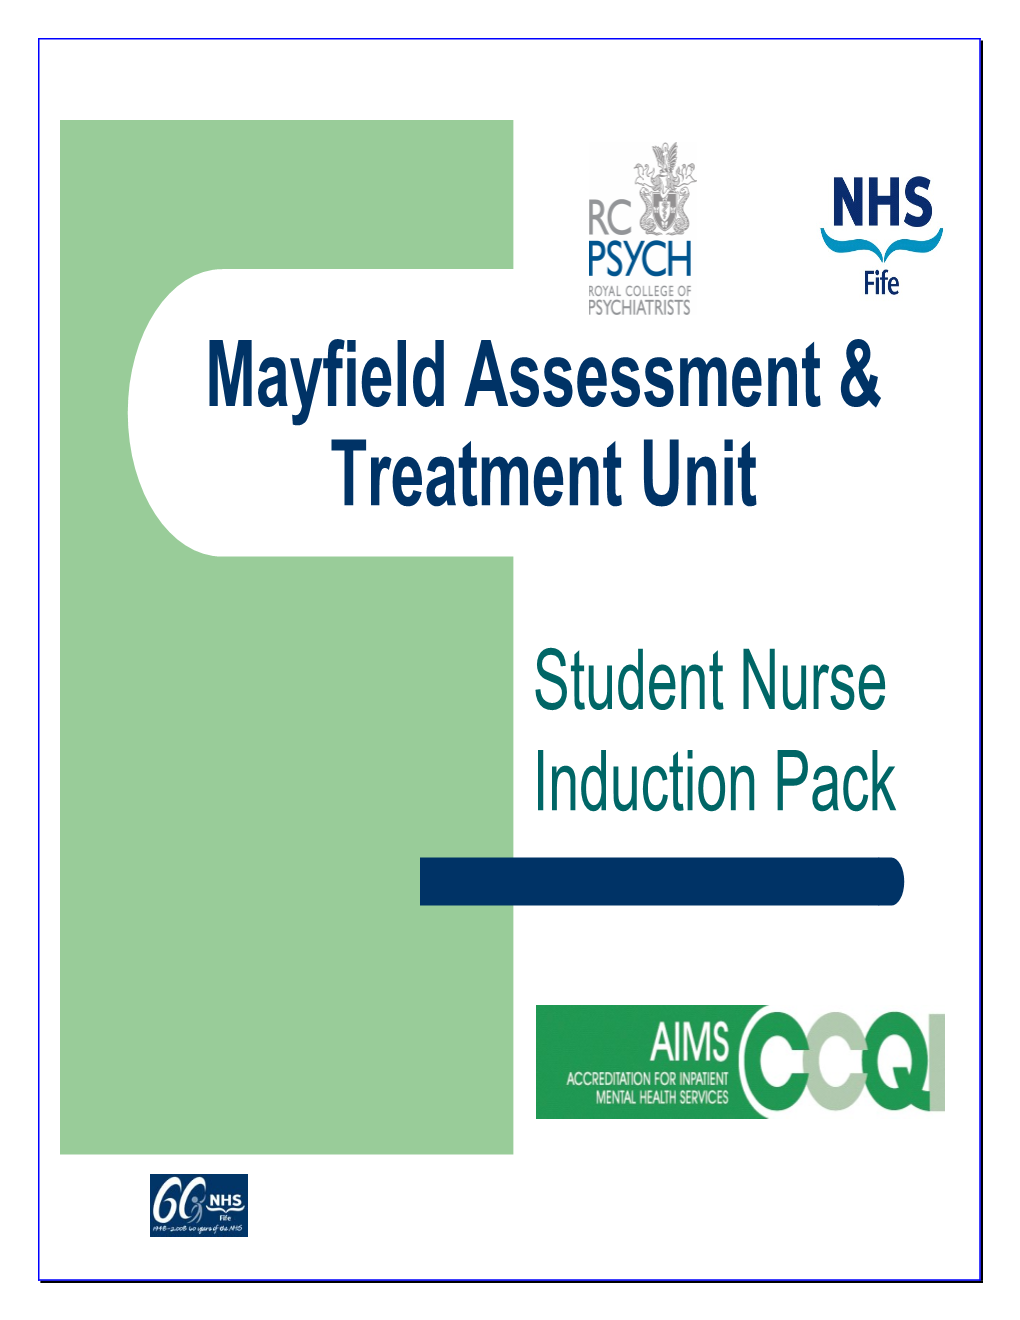 1. Introduction to Mayfield Ward